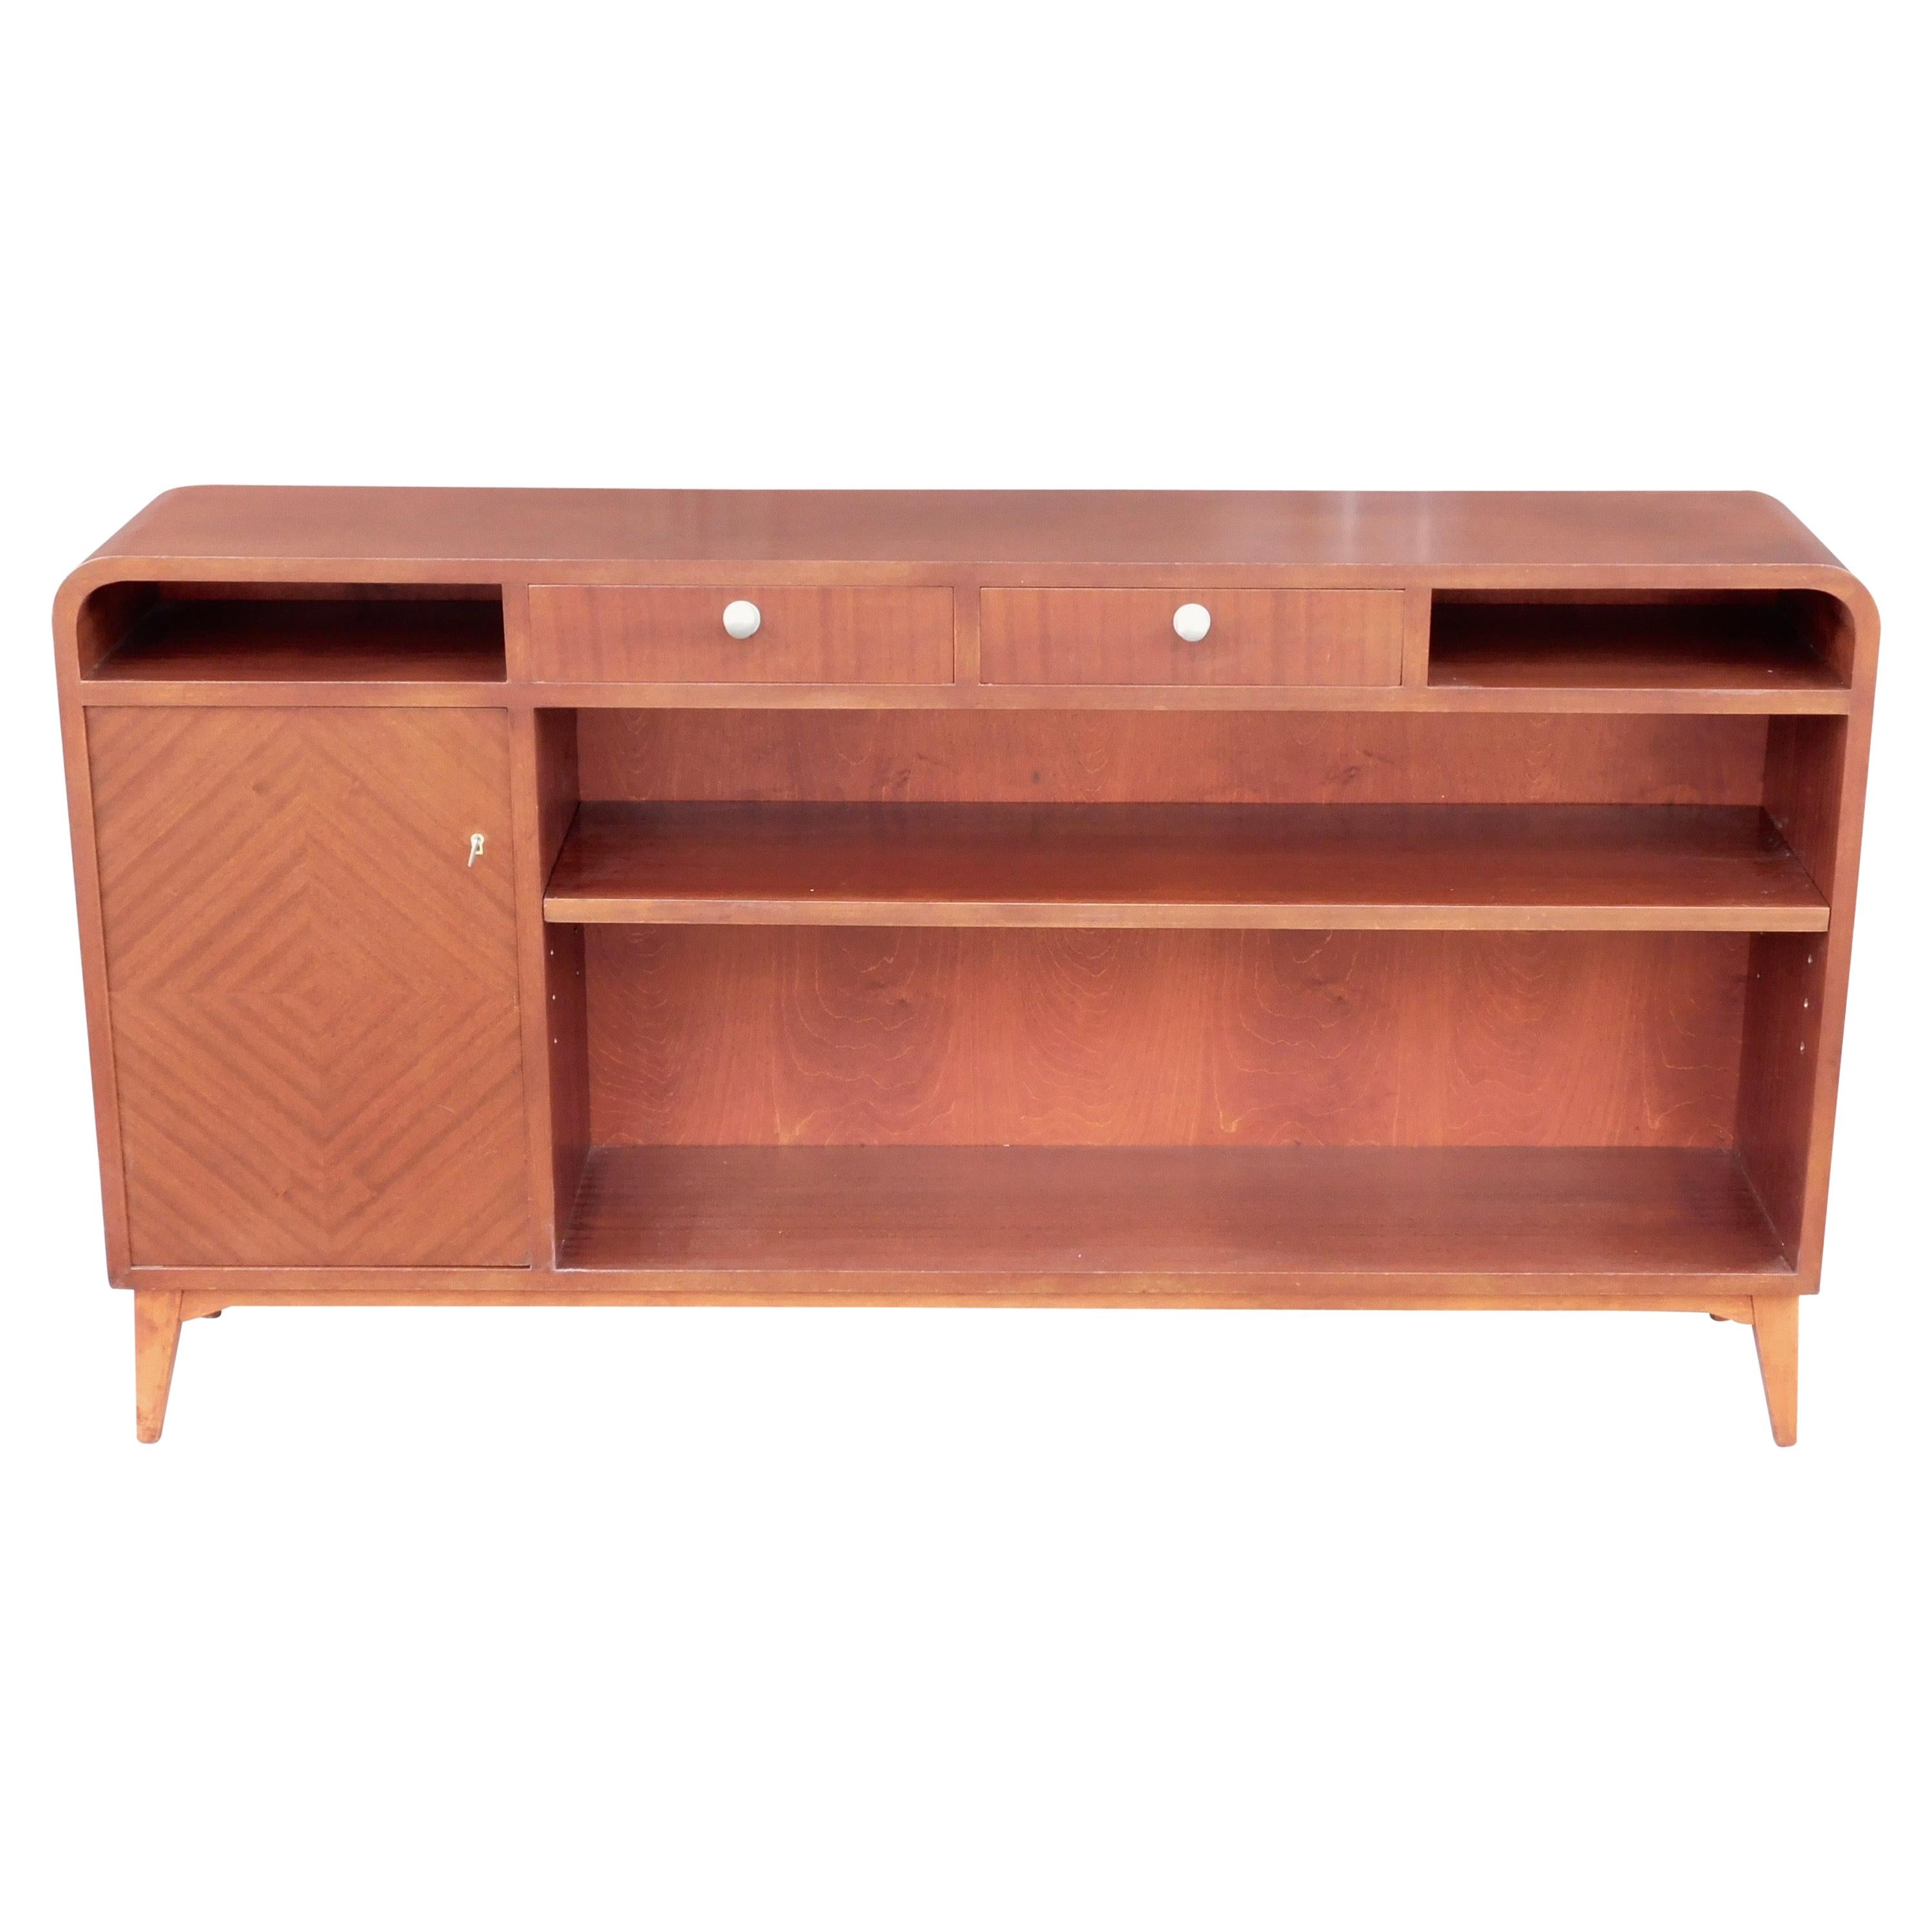 Swedish Art Modern Bookcase in Book Matched Mahogany, circa 1940 For Sale